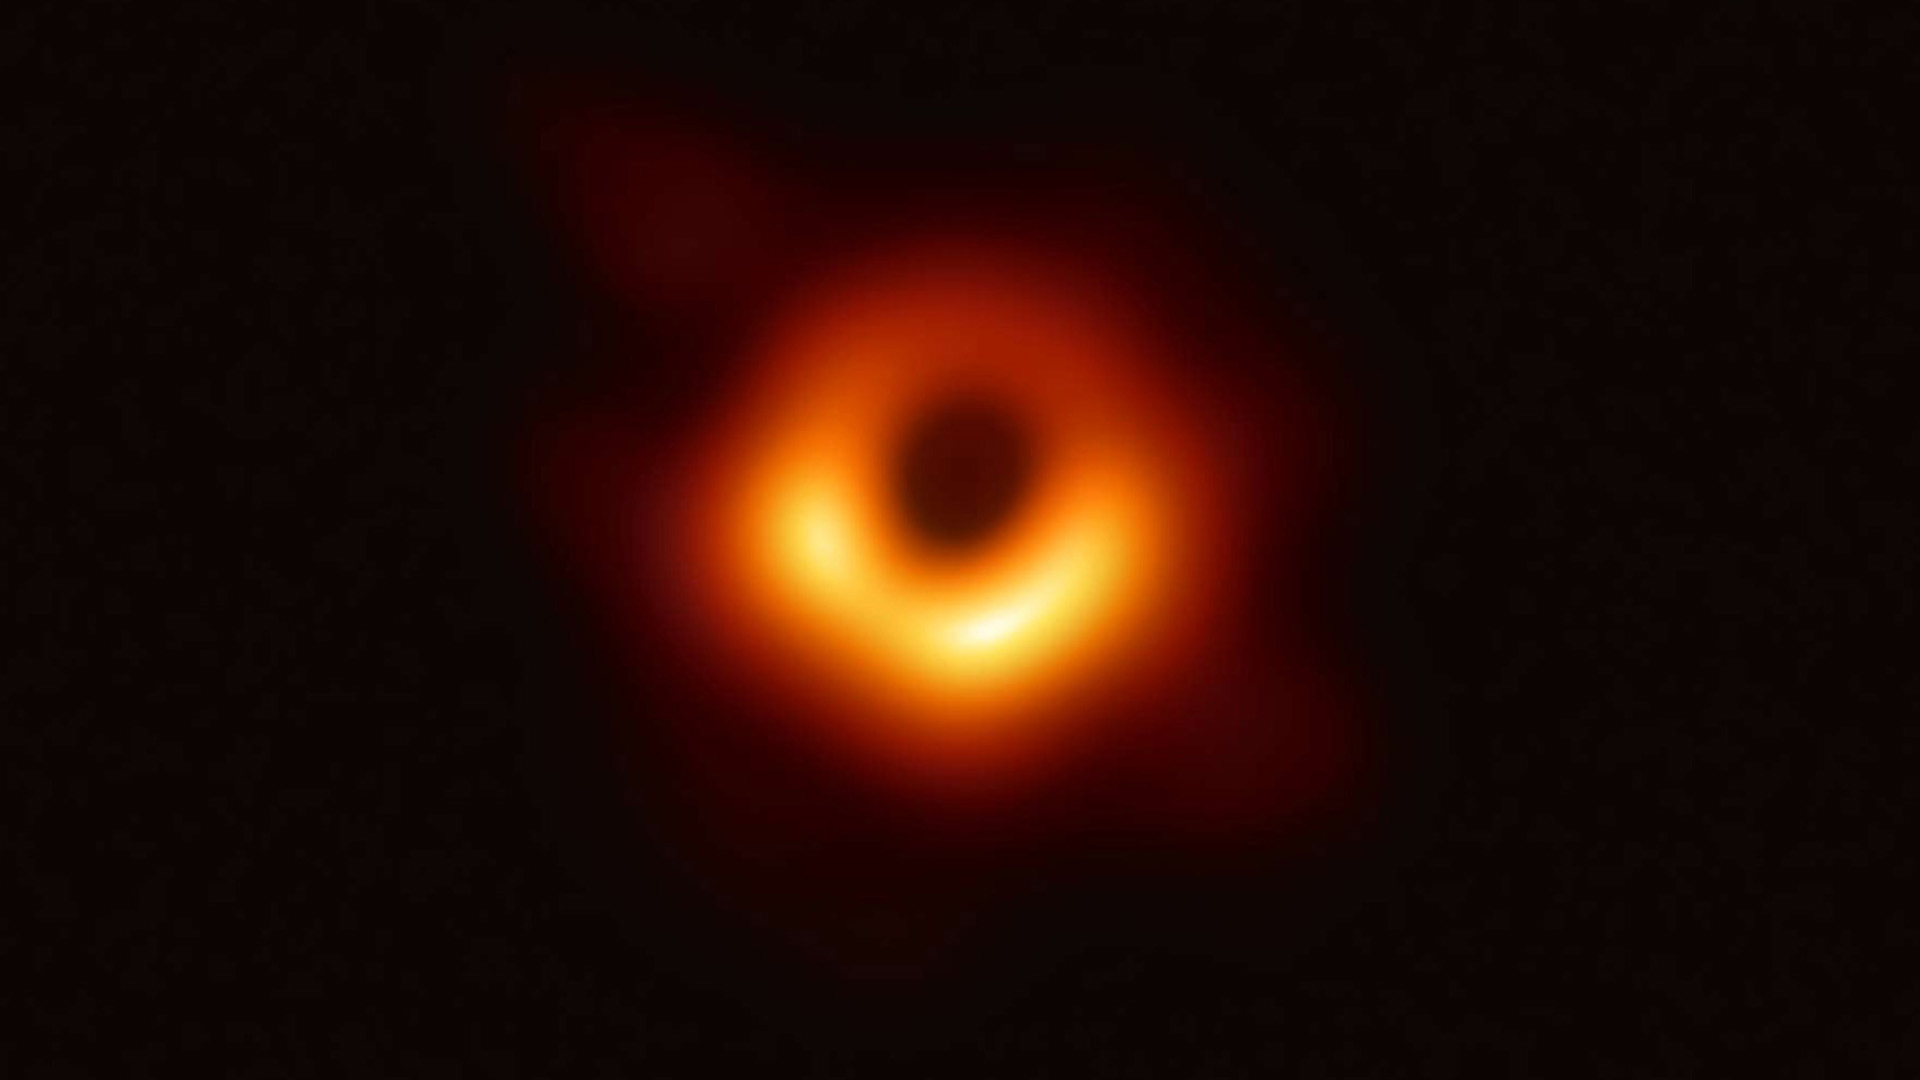 Historic image of a black hole by Event Horizon Telescope.